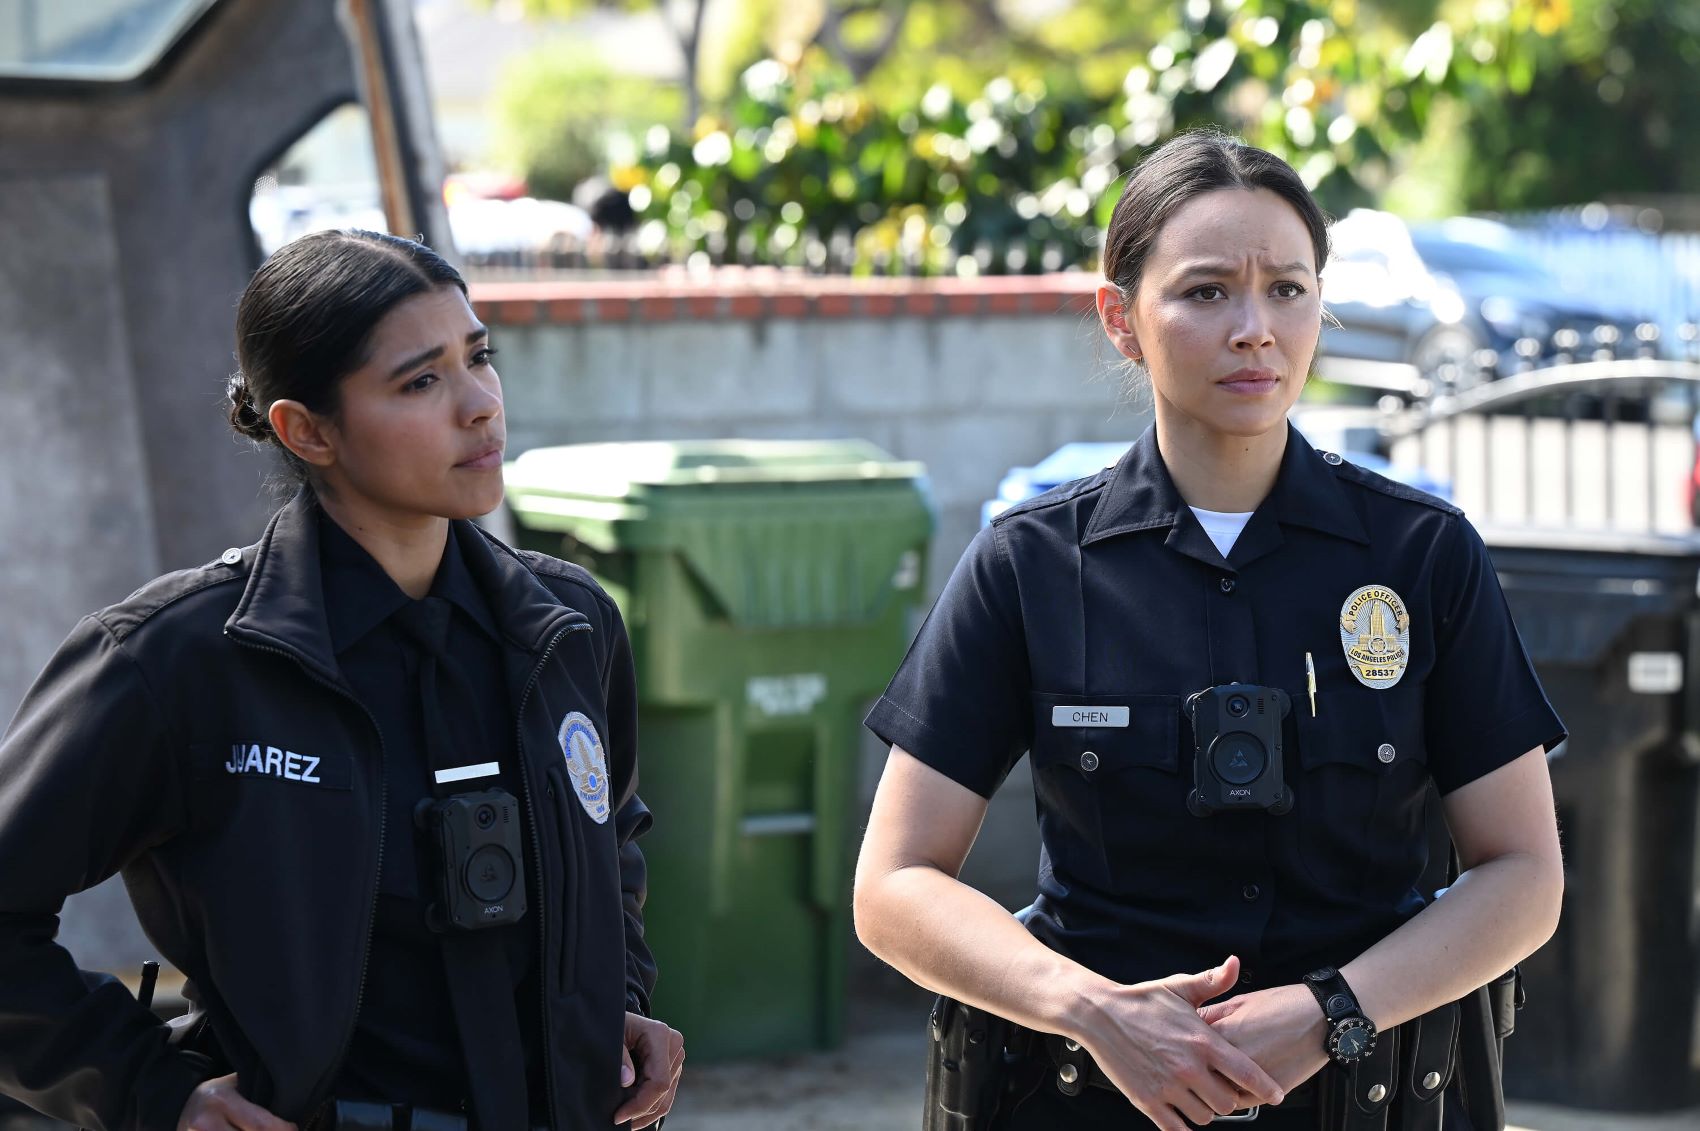 Lisseth Chavez as Celina Juarez and Melissa O'Neil as Lucy Chen share a scene in 'The Rookie' Season 5. In the photo, Celina and Lucy wear their dark blue police uniforms.